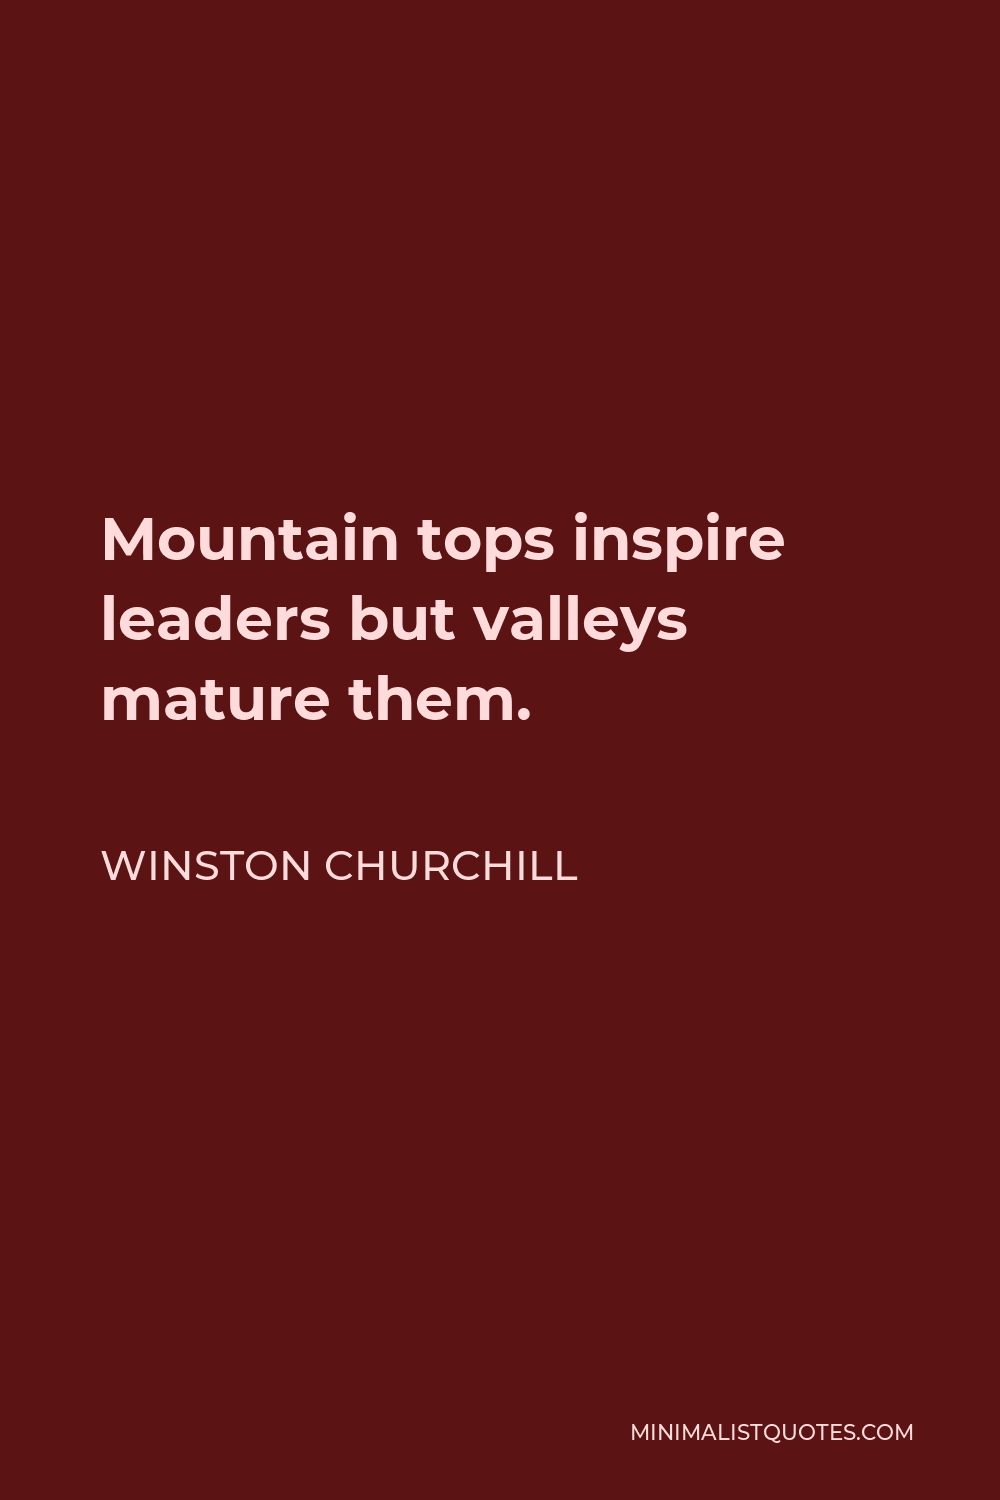 Winston Churchill Quote - Mountain tops inspire leaders but valleys mature them.